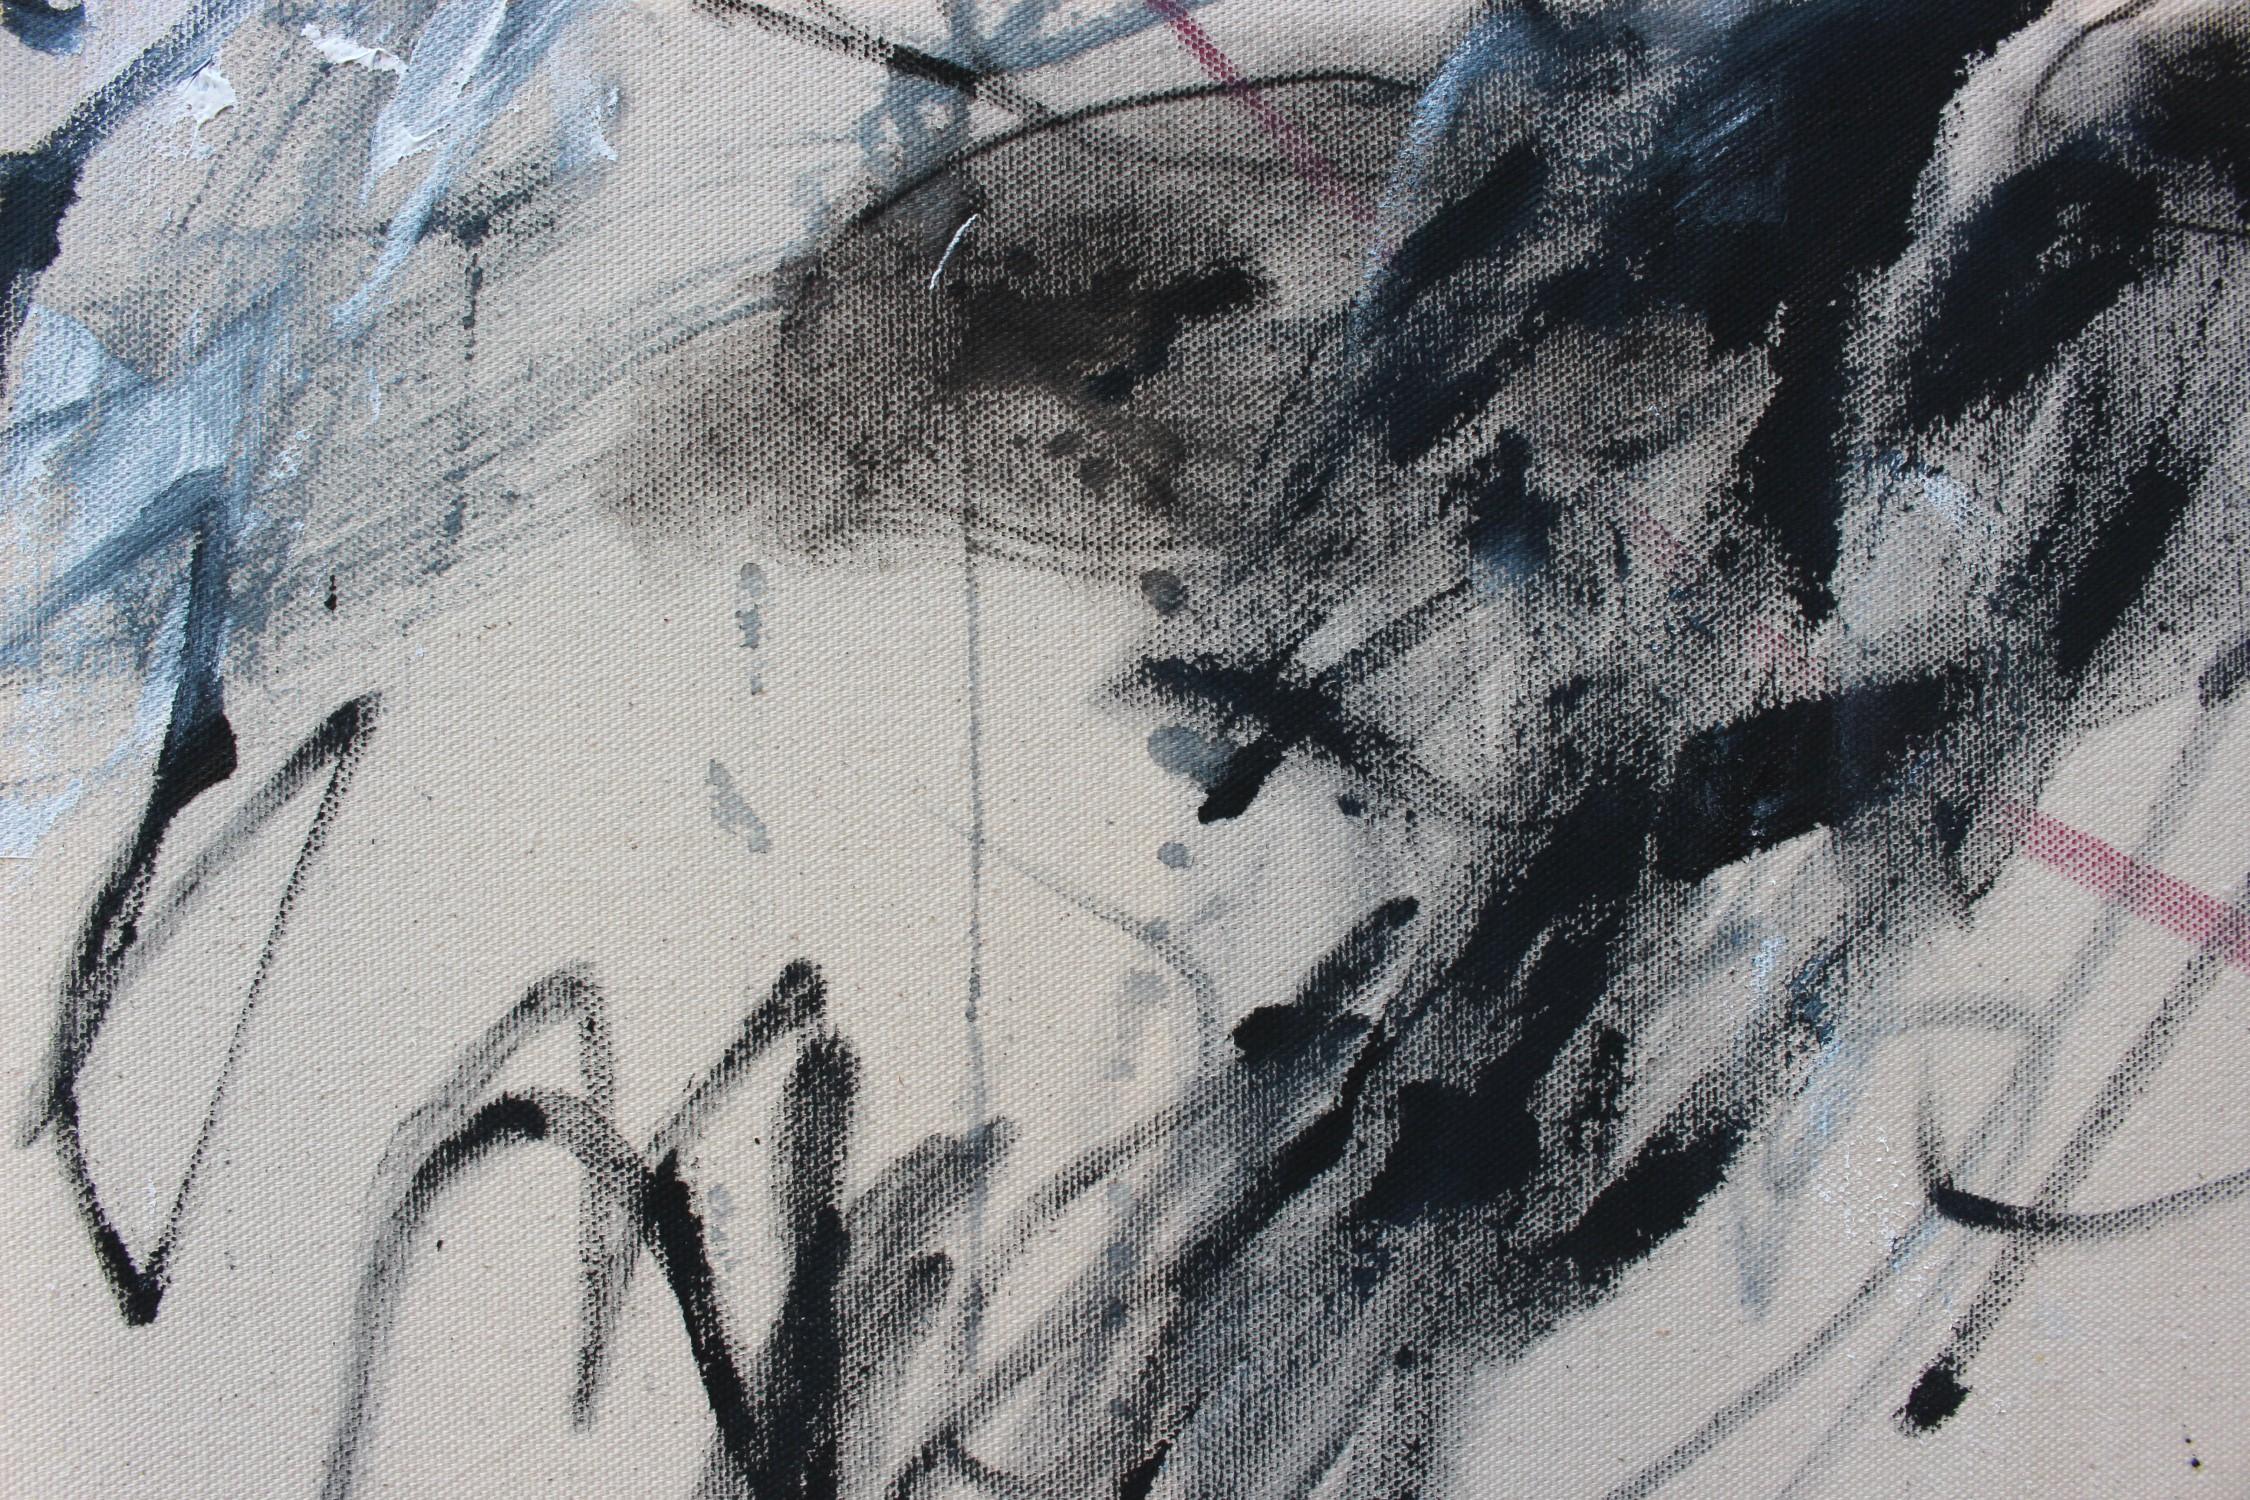 Unwritten letters (Abstract painting) - Painting by Daniela Schweinsberg